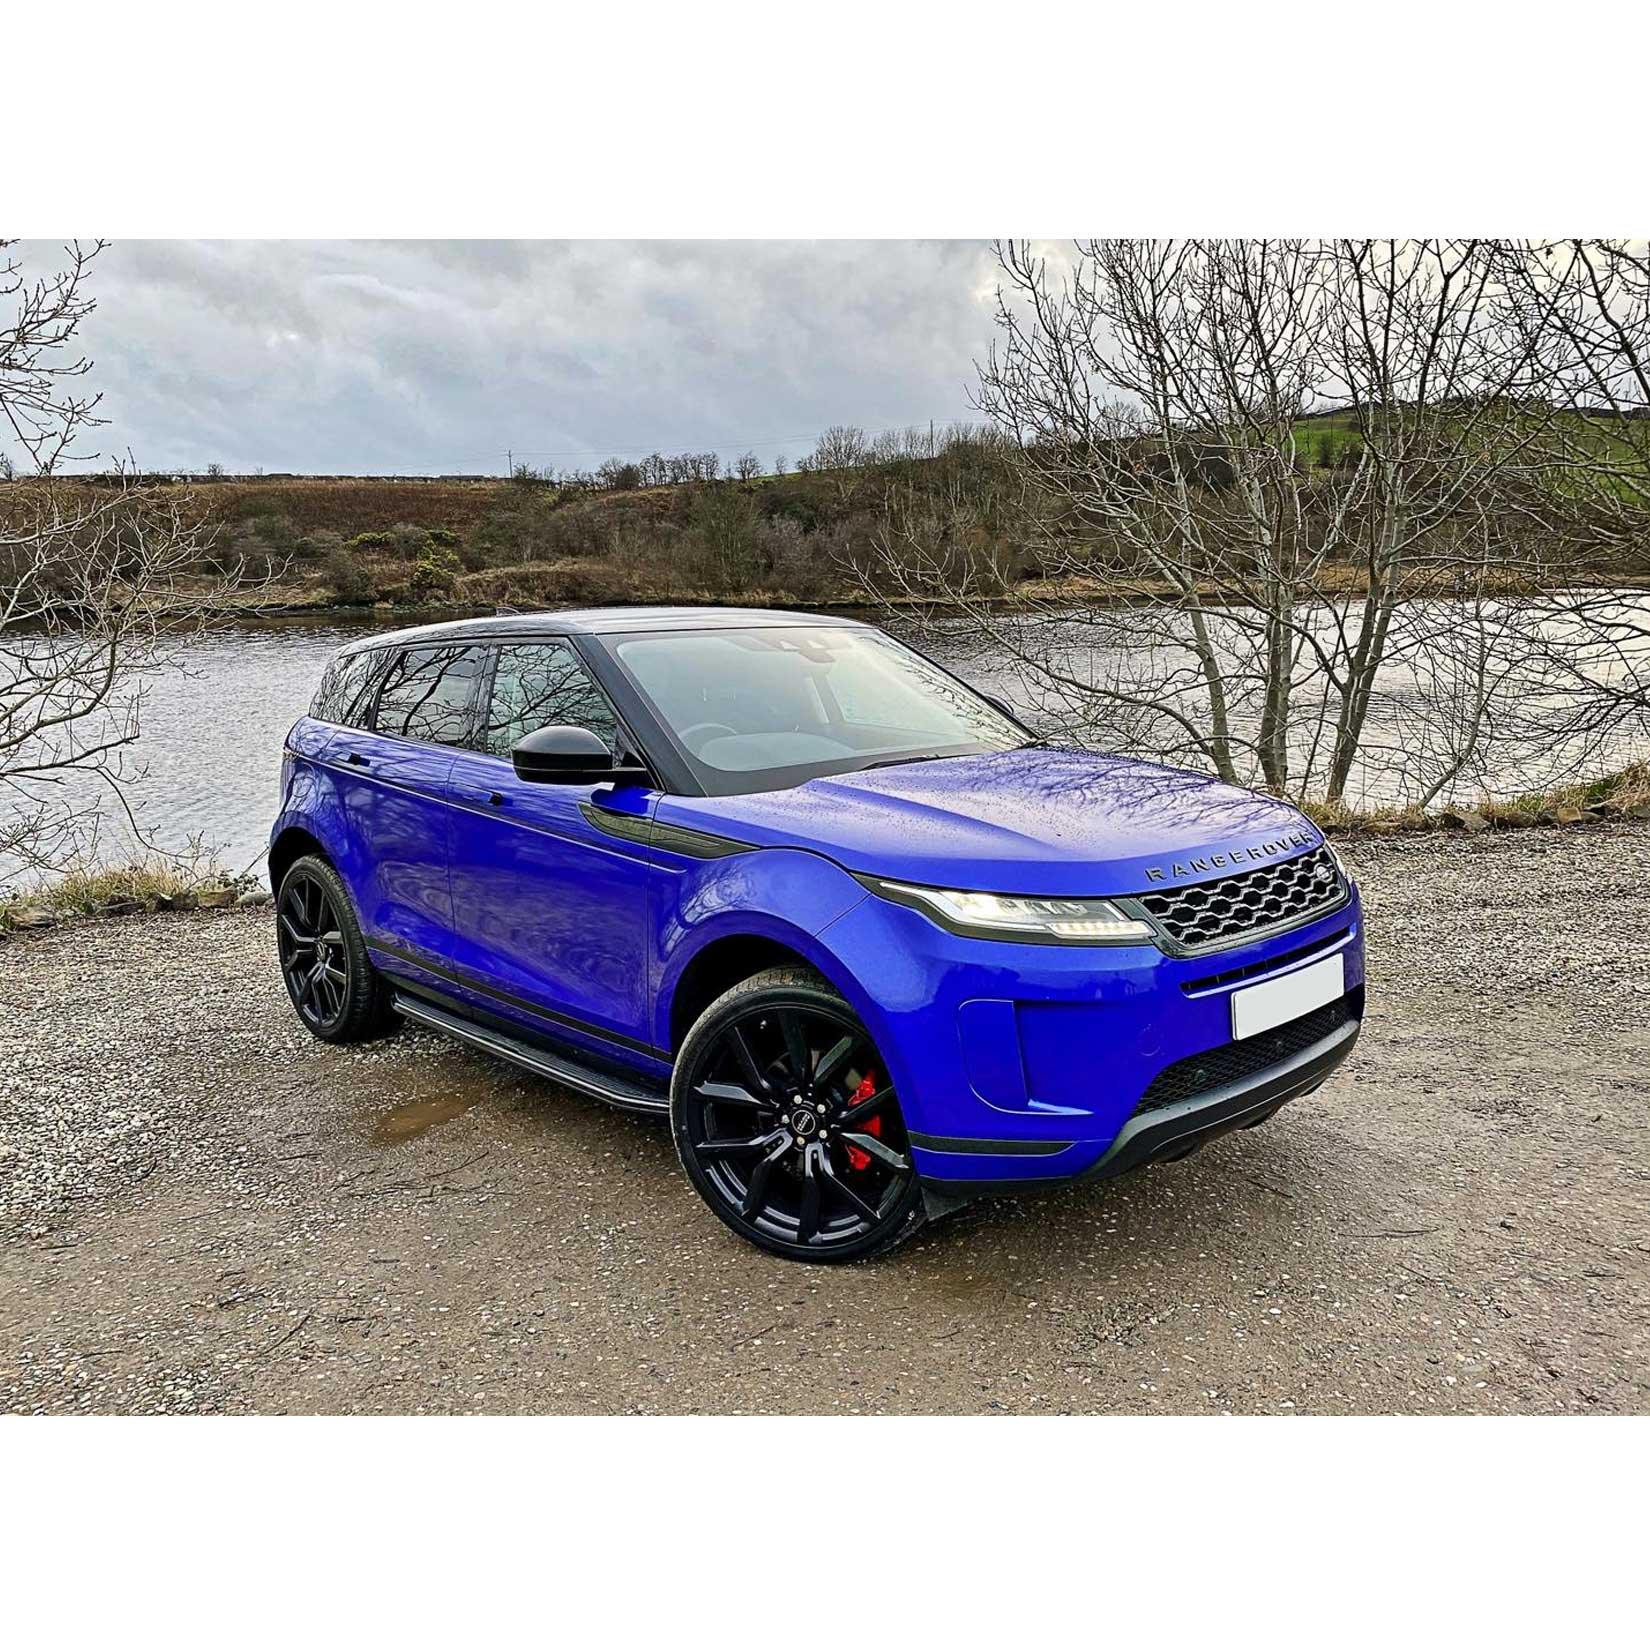 RANGE ROVER EVOQUE 2018 ON OE STYLE RUNNING BOARDS – SIDE STEPS – IN BLACK – PAIR - RisperStyling